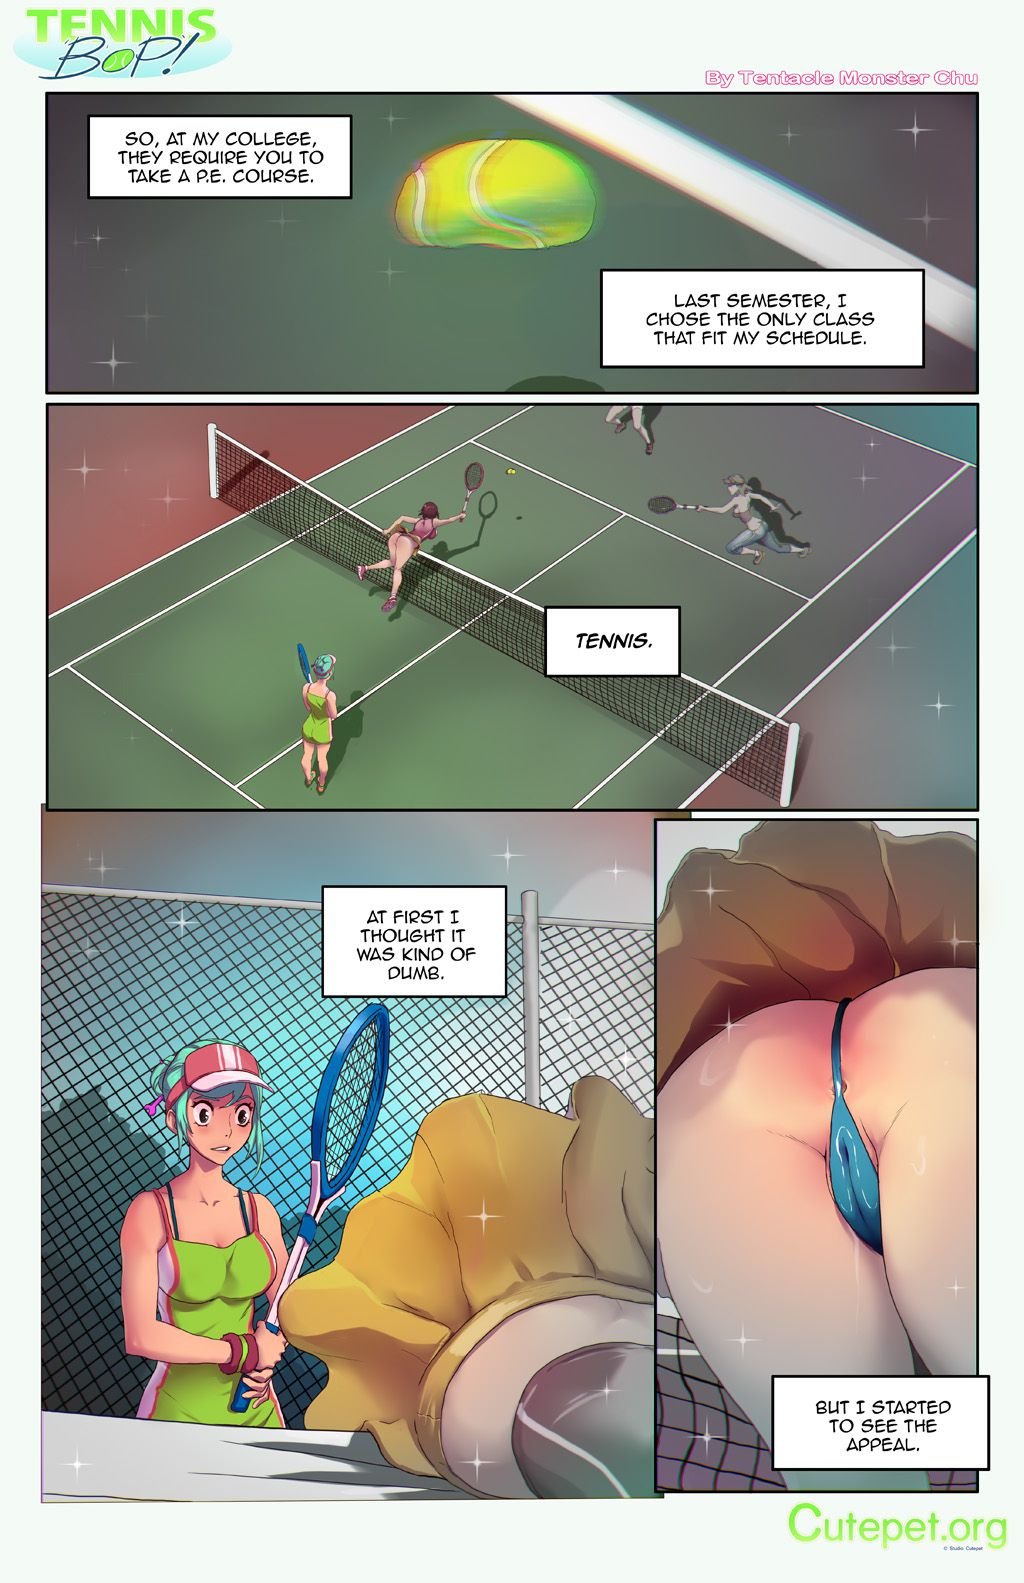 Tennis Porn Comics - Time Stop! And Bop [CutePet] - 2.1 . Tennis Bop! Back-End-Spin - Chapter  2.1 - Extra [CutePet] - AllPornComic